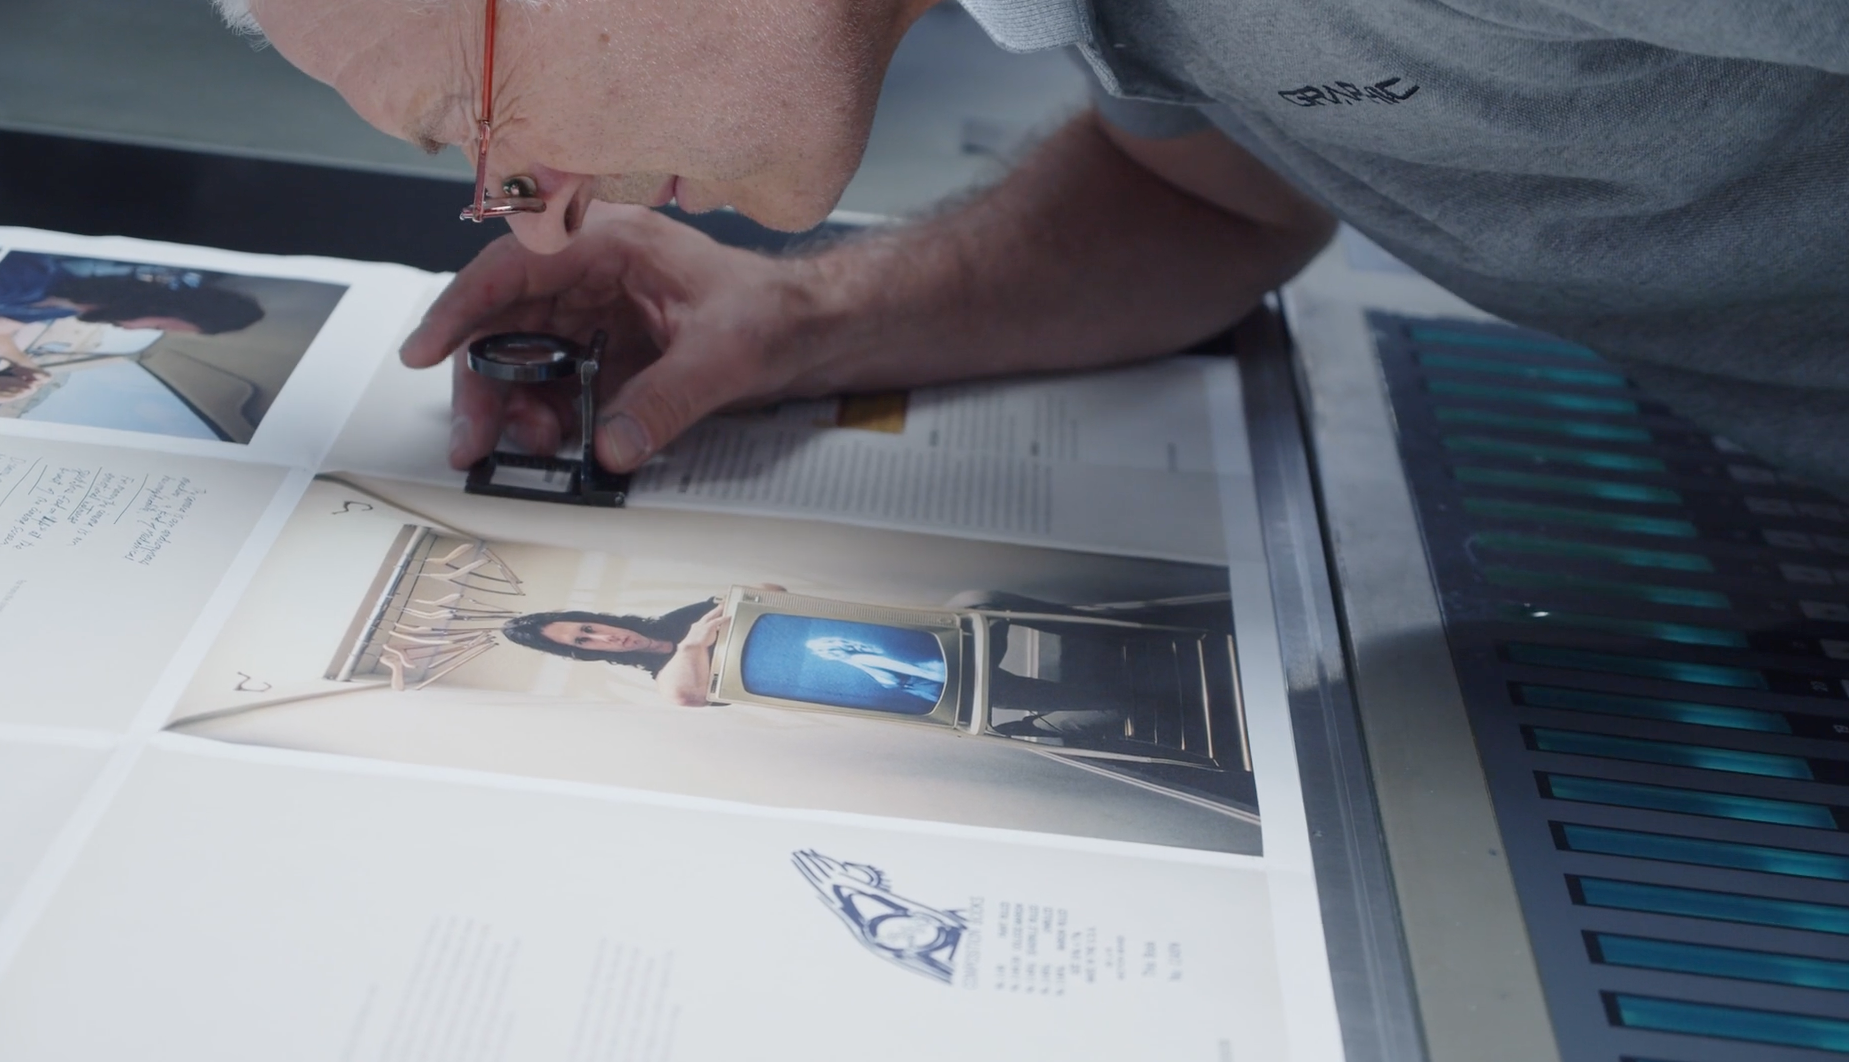 Load video: Video showing the making of a limited edition, hand-crafted book.